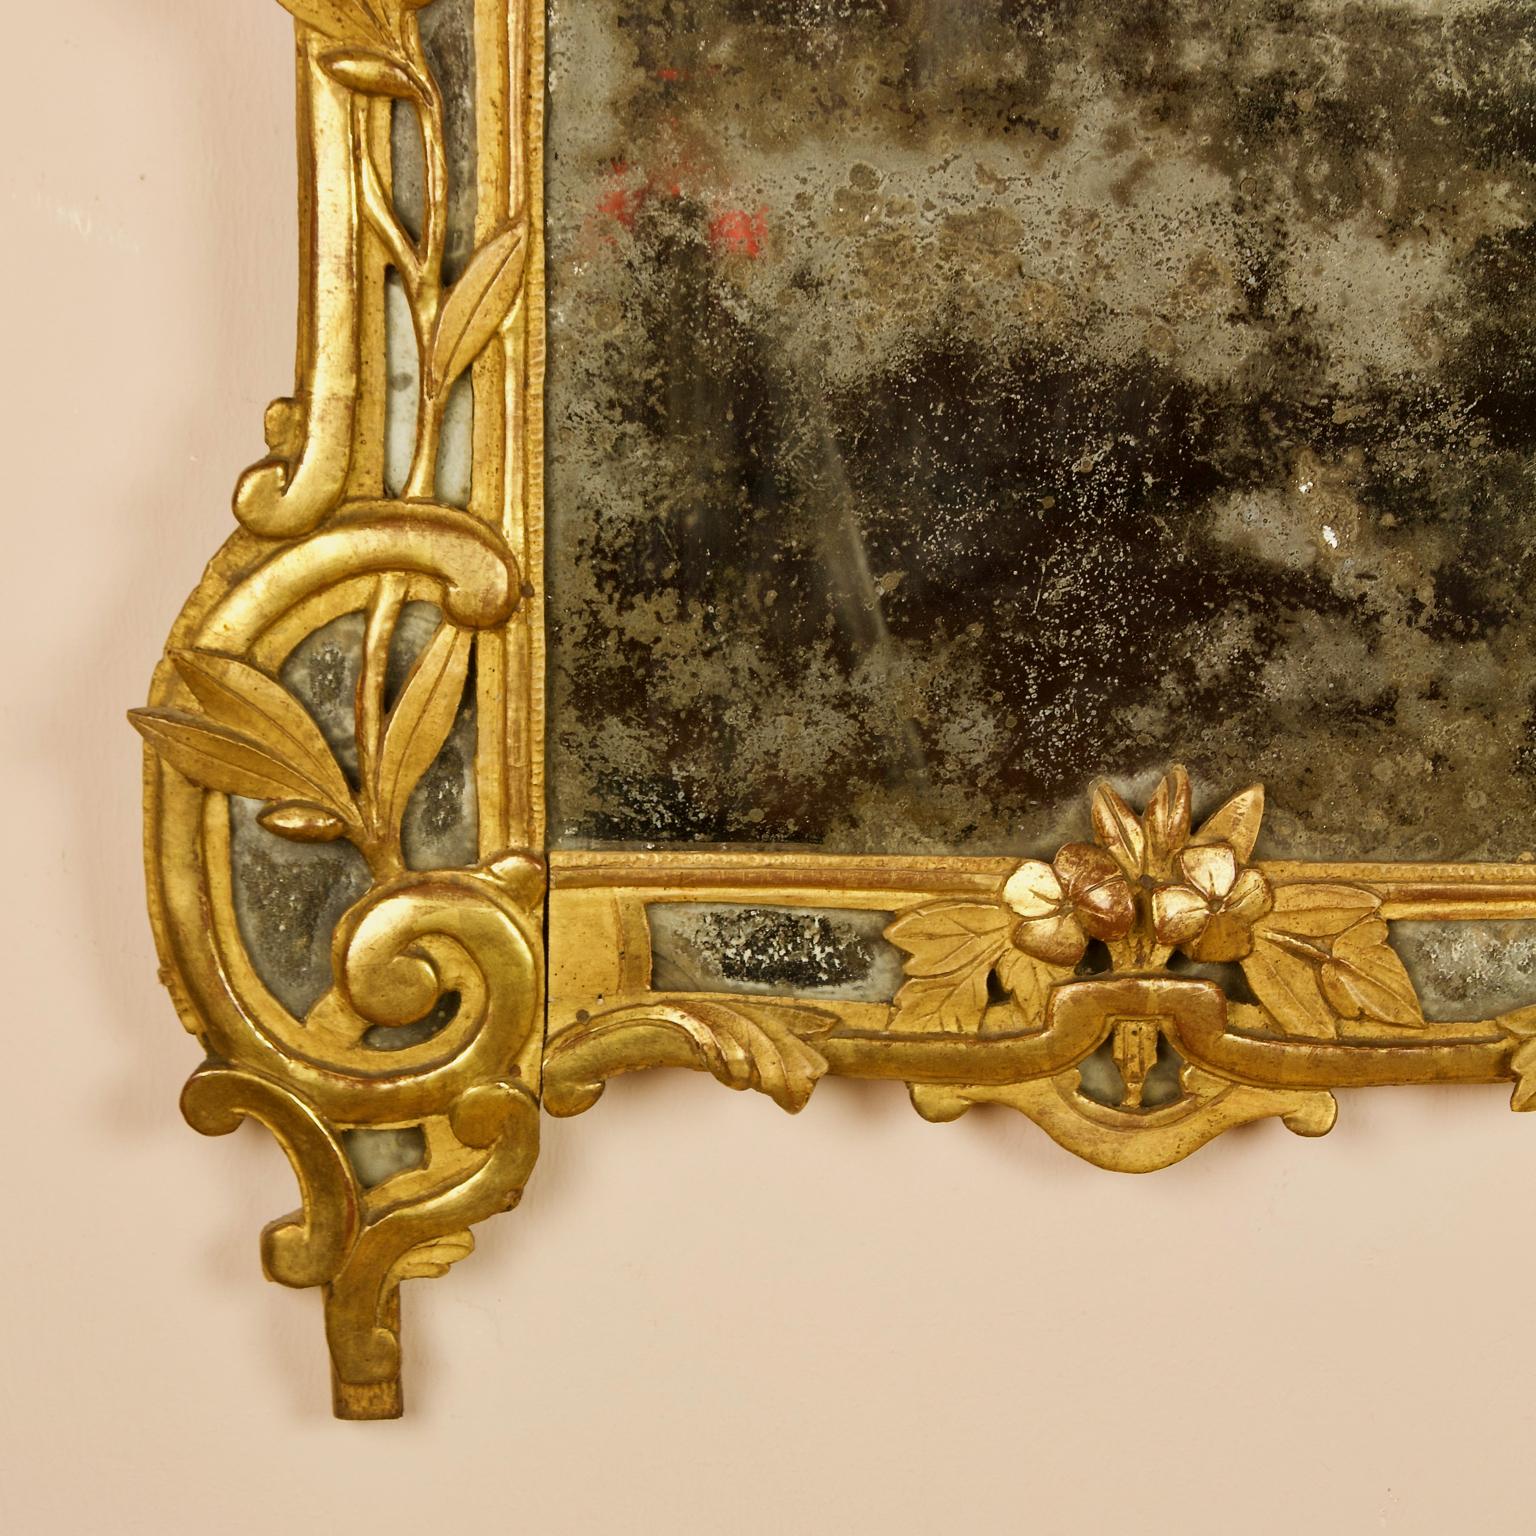 French Louis XV Rococo 18th Century Carved Gilt Wood Flower Basket Wall Mirror

A mid-18th century French Louis XV gilt wood wall mirror with original rectangular mirror pane, the mirrored showing bold intricate foliage and floral carving. The